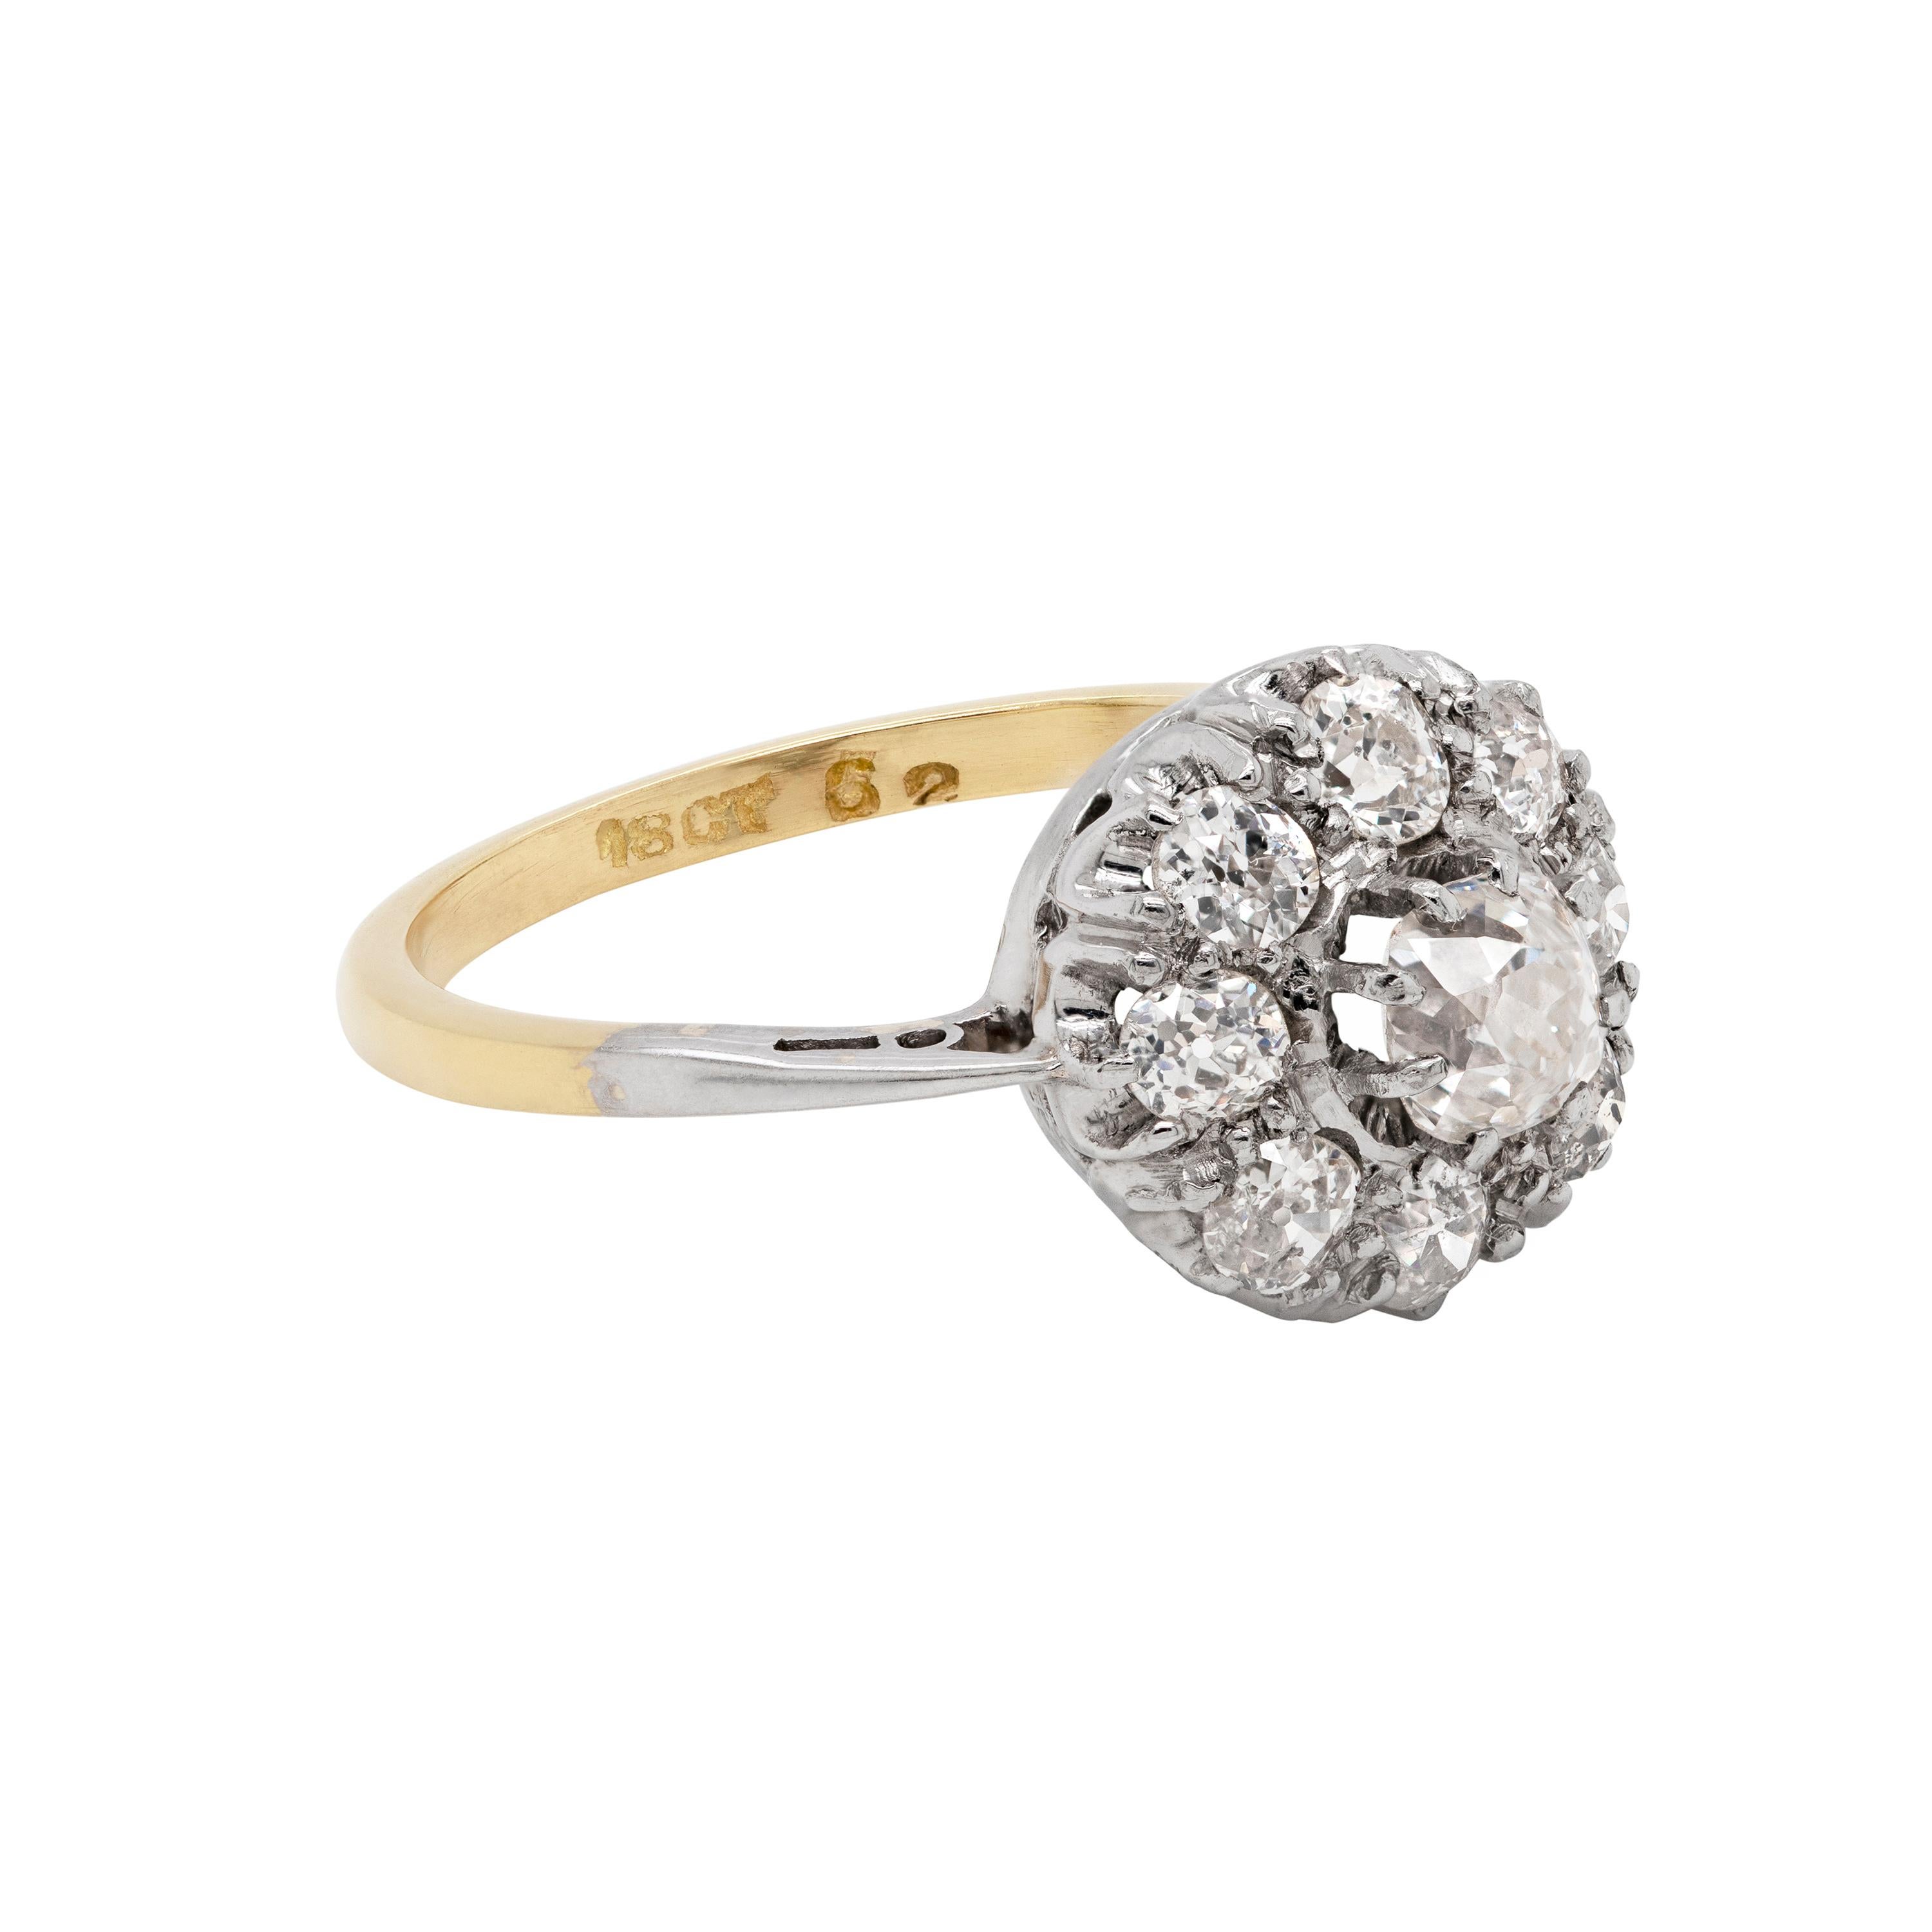 This beautiful cluster engagement ring features nine old mine cut diamonds, all claw set on a platinum collet, atop a 18ct yellow gold shank. The central old cut diamond, with a carat weight of 0.40ct, is beautifully surrounded by another eight old